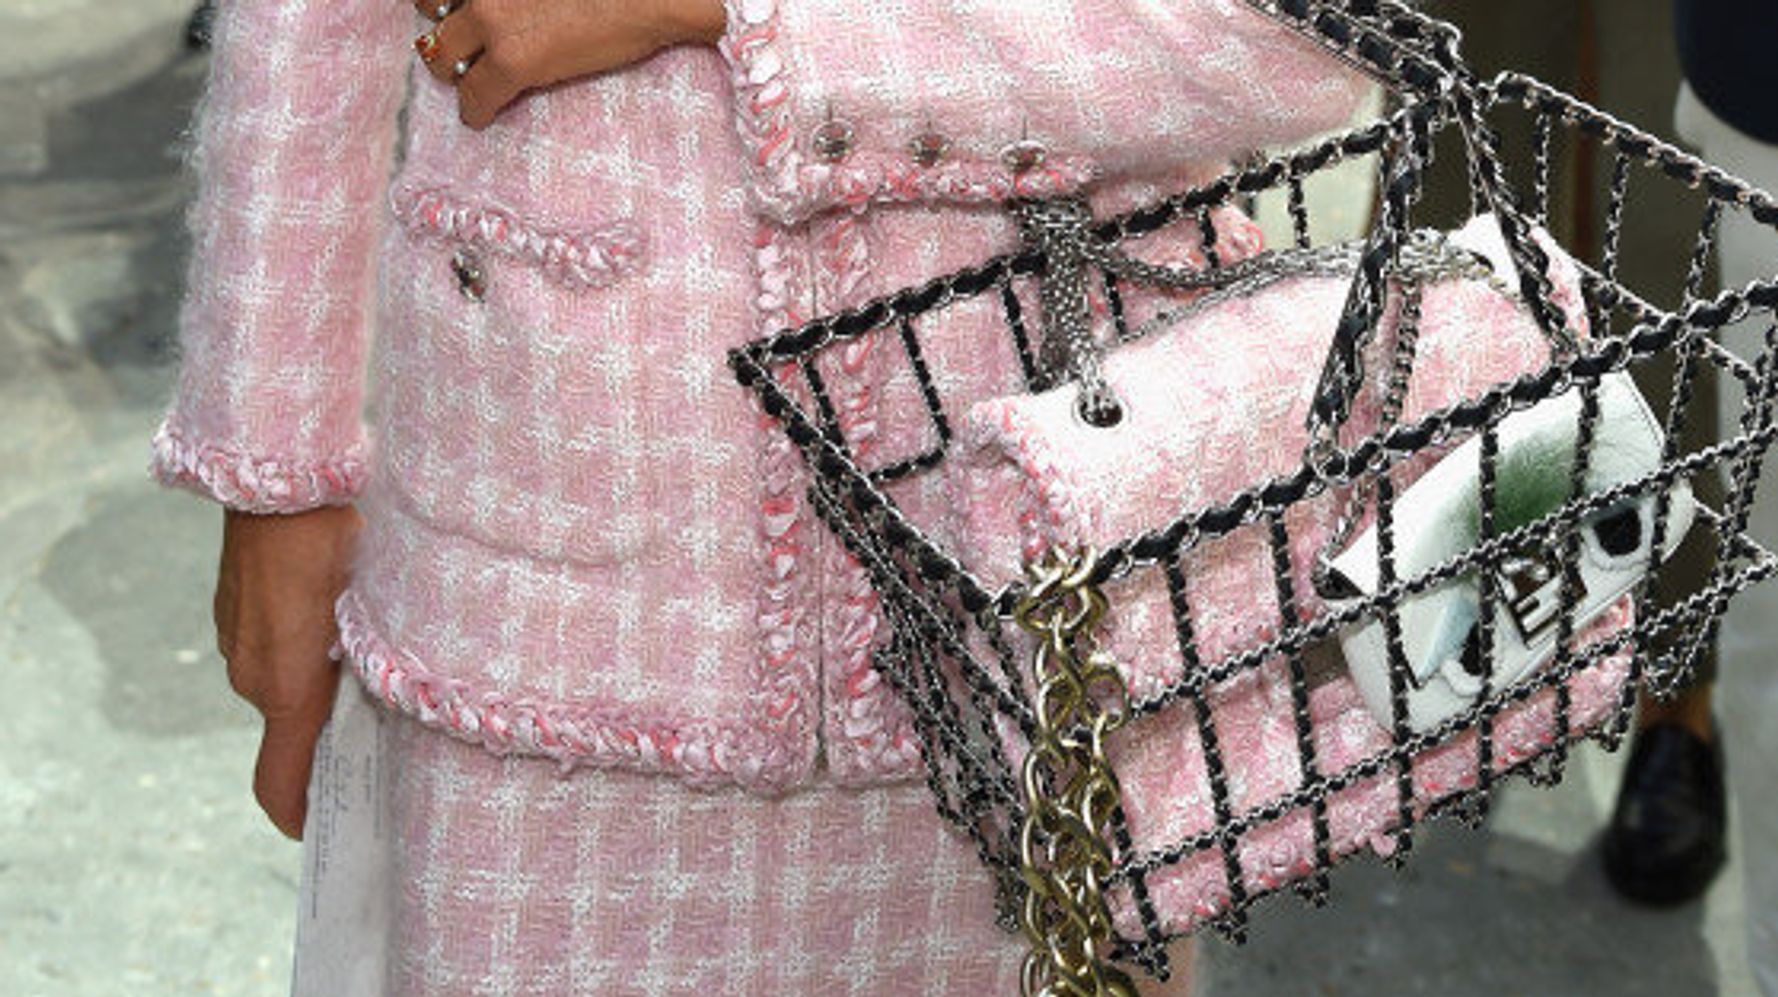 Why A Chanel Shopping Basket Bag Costs $26650 USD pre-owned?